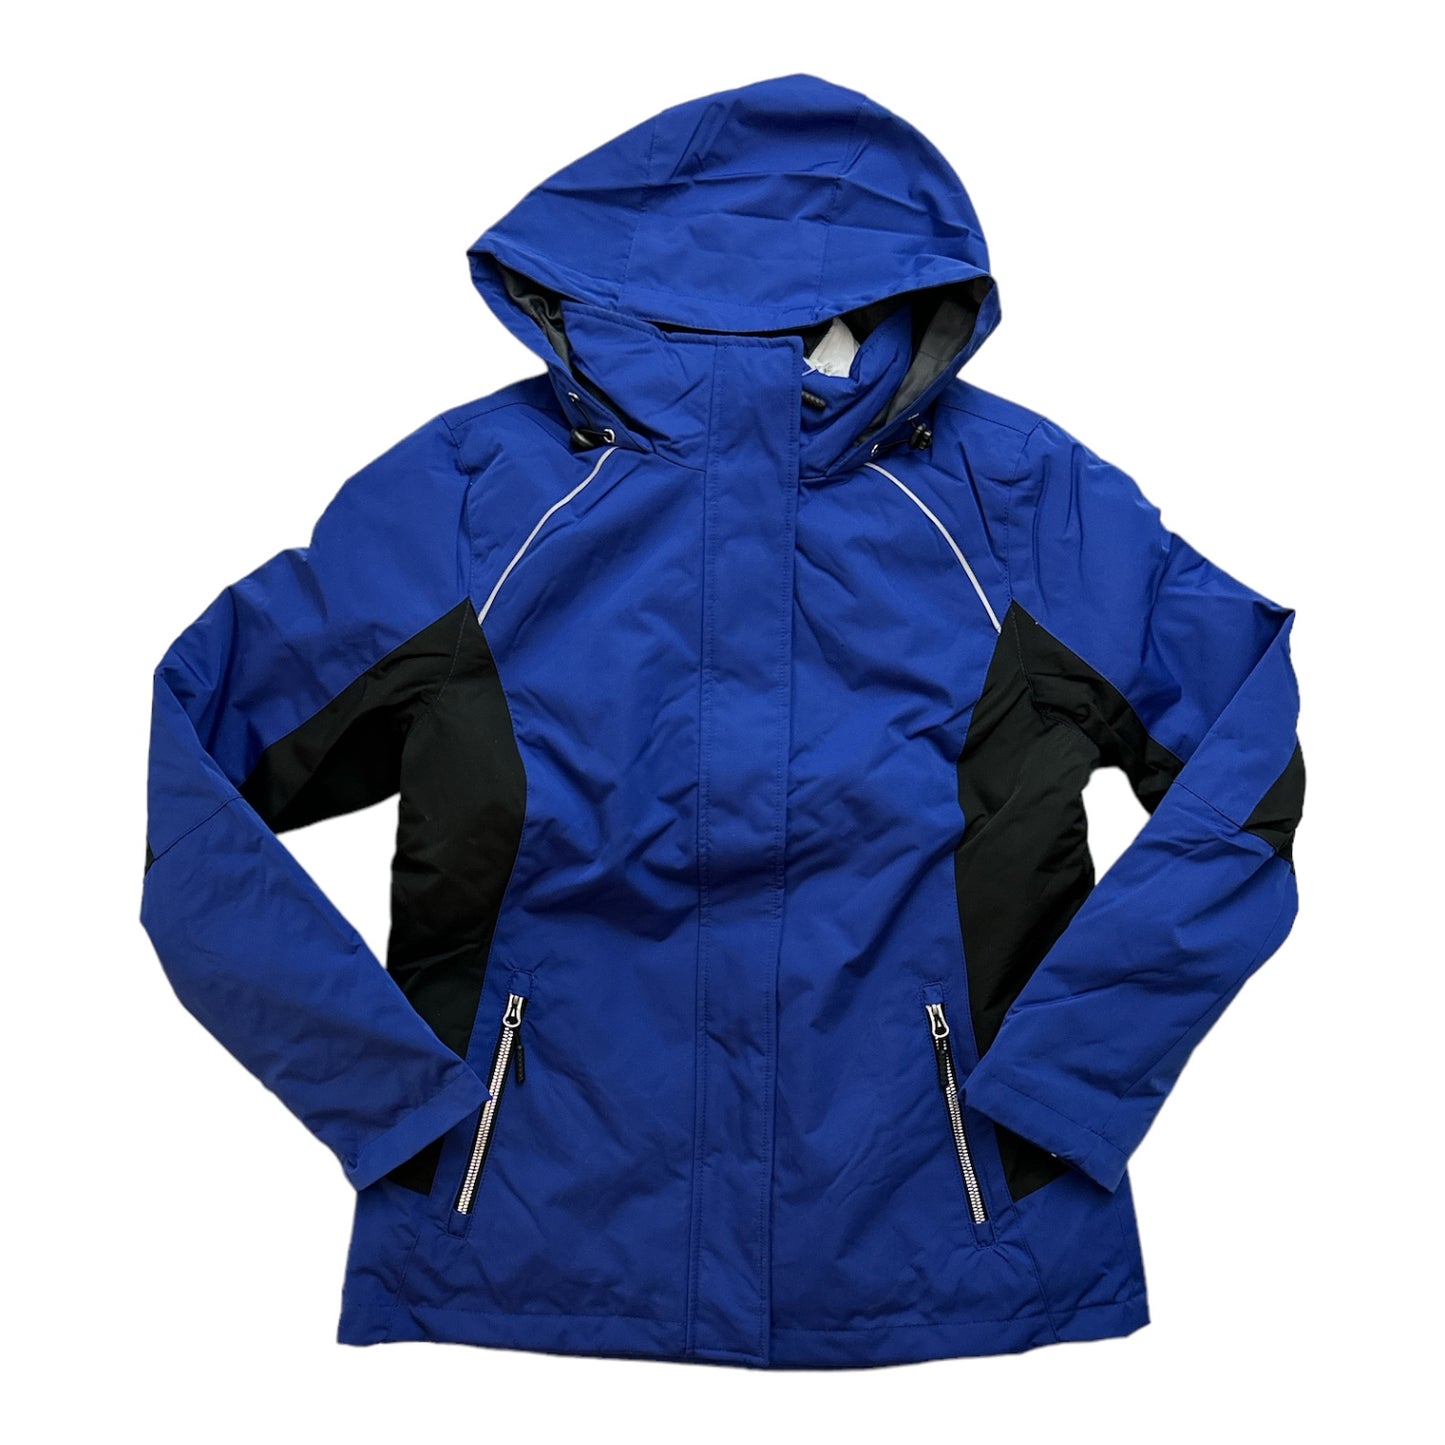 Free Country Women's 3-In-1 Summit Systems Hooded Jacket